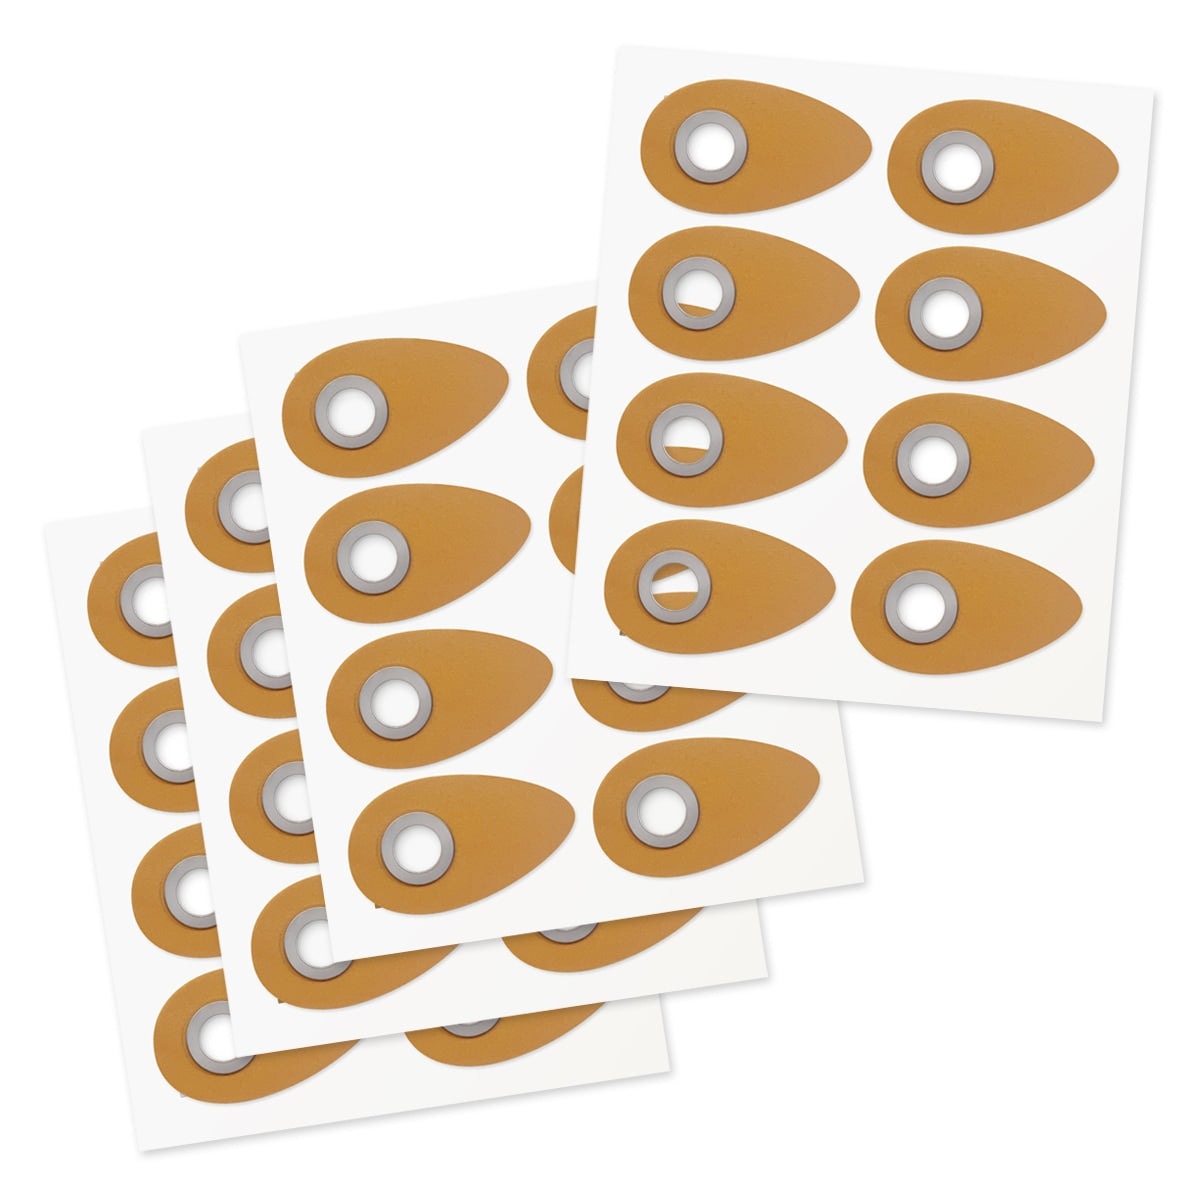 Bleep Eclipse Halos Adhesive Patches - 32 Pack (16 Nights) 100590